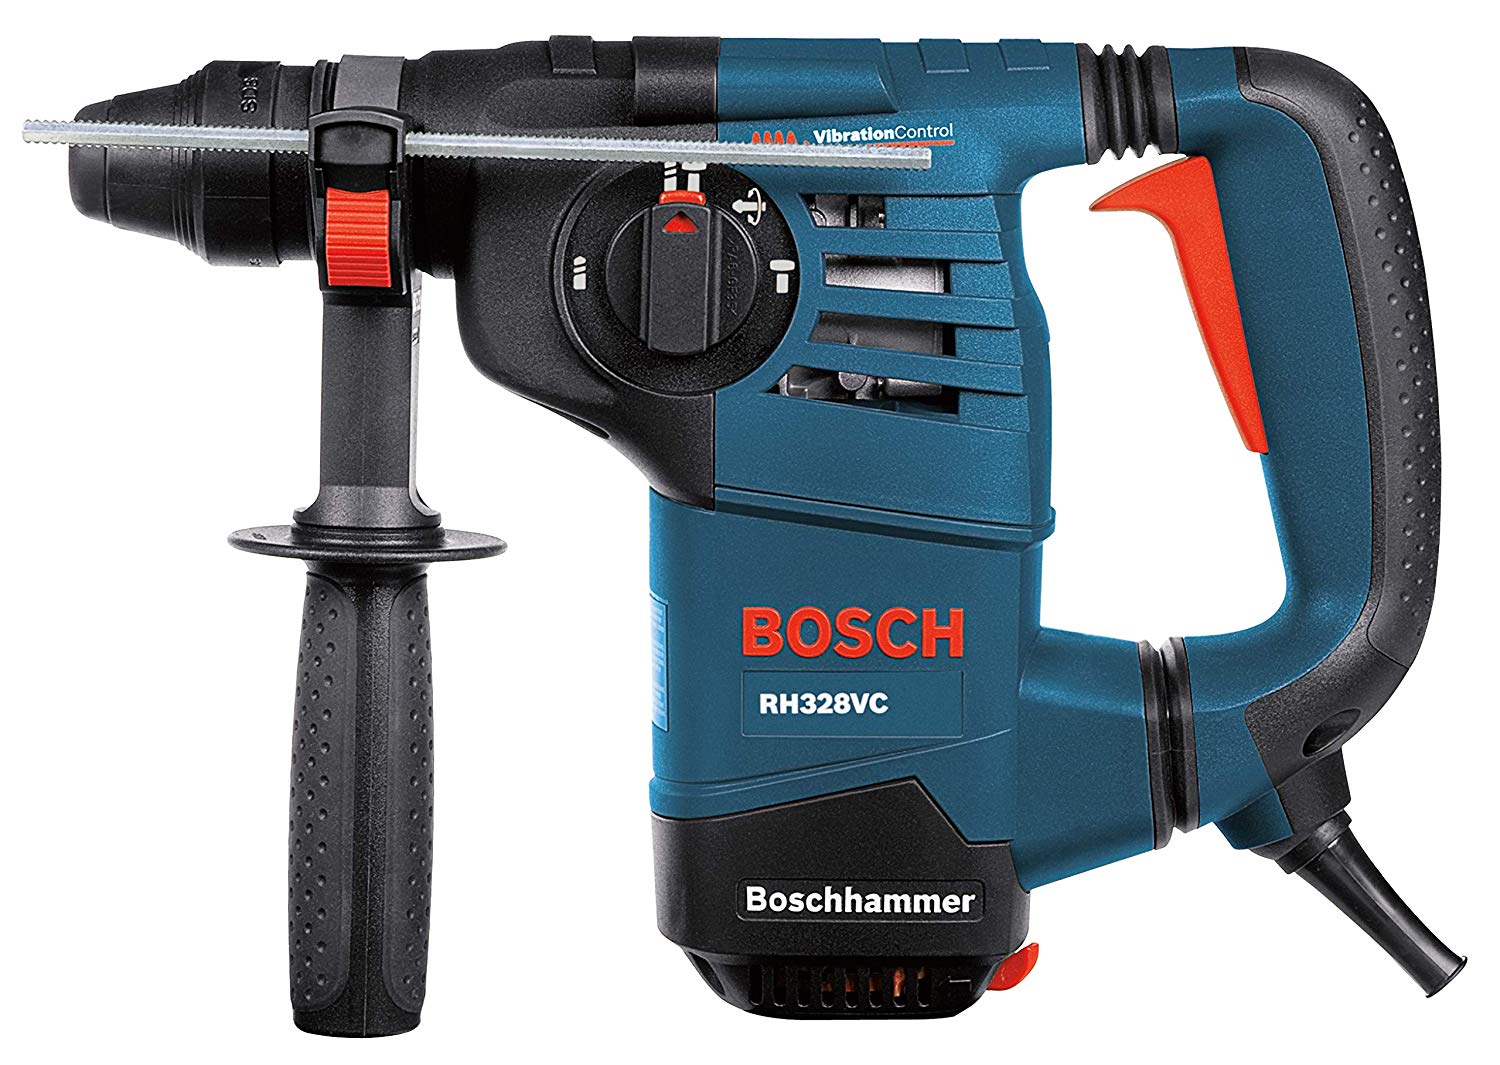 Bosch Drill For Concrete - Mary Blog